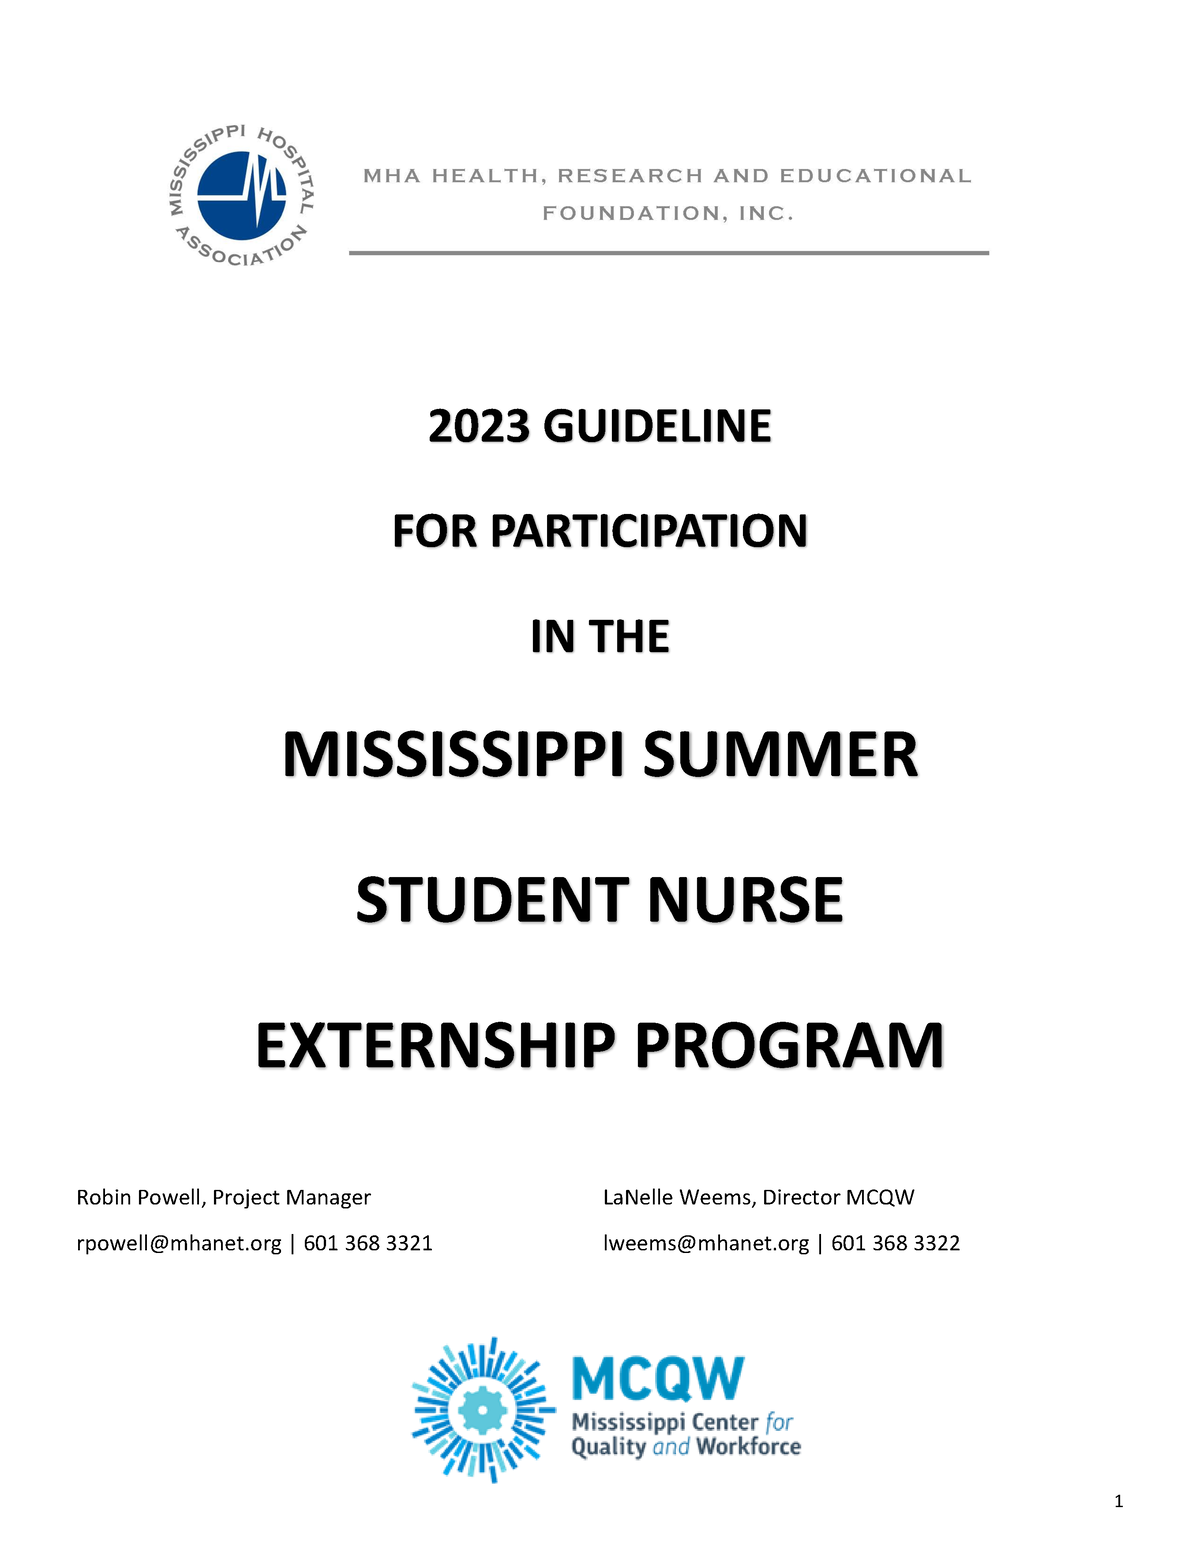 2023 Guideline for participation in the MS Summer Student Nurse Extern